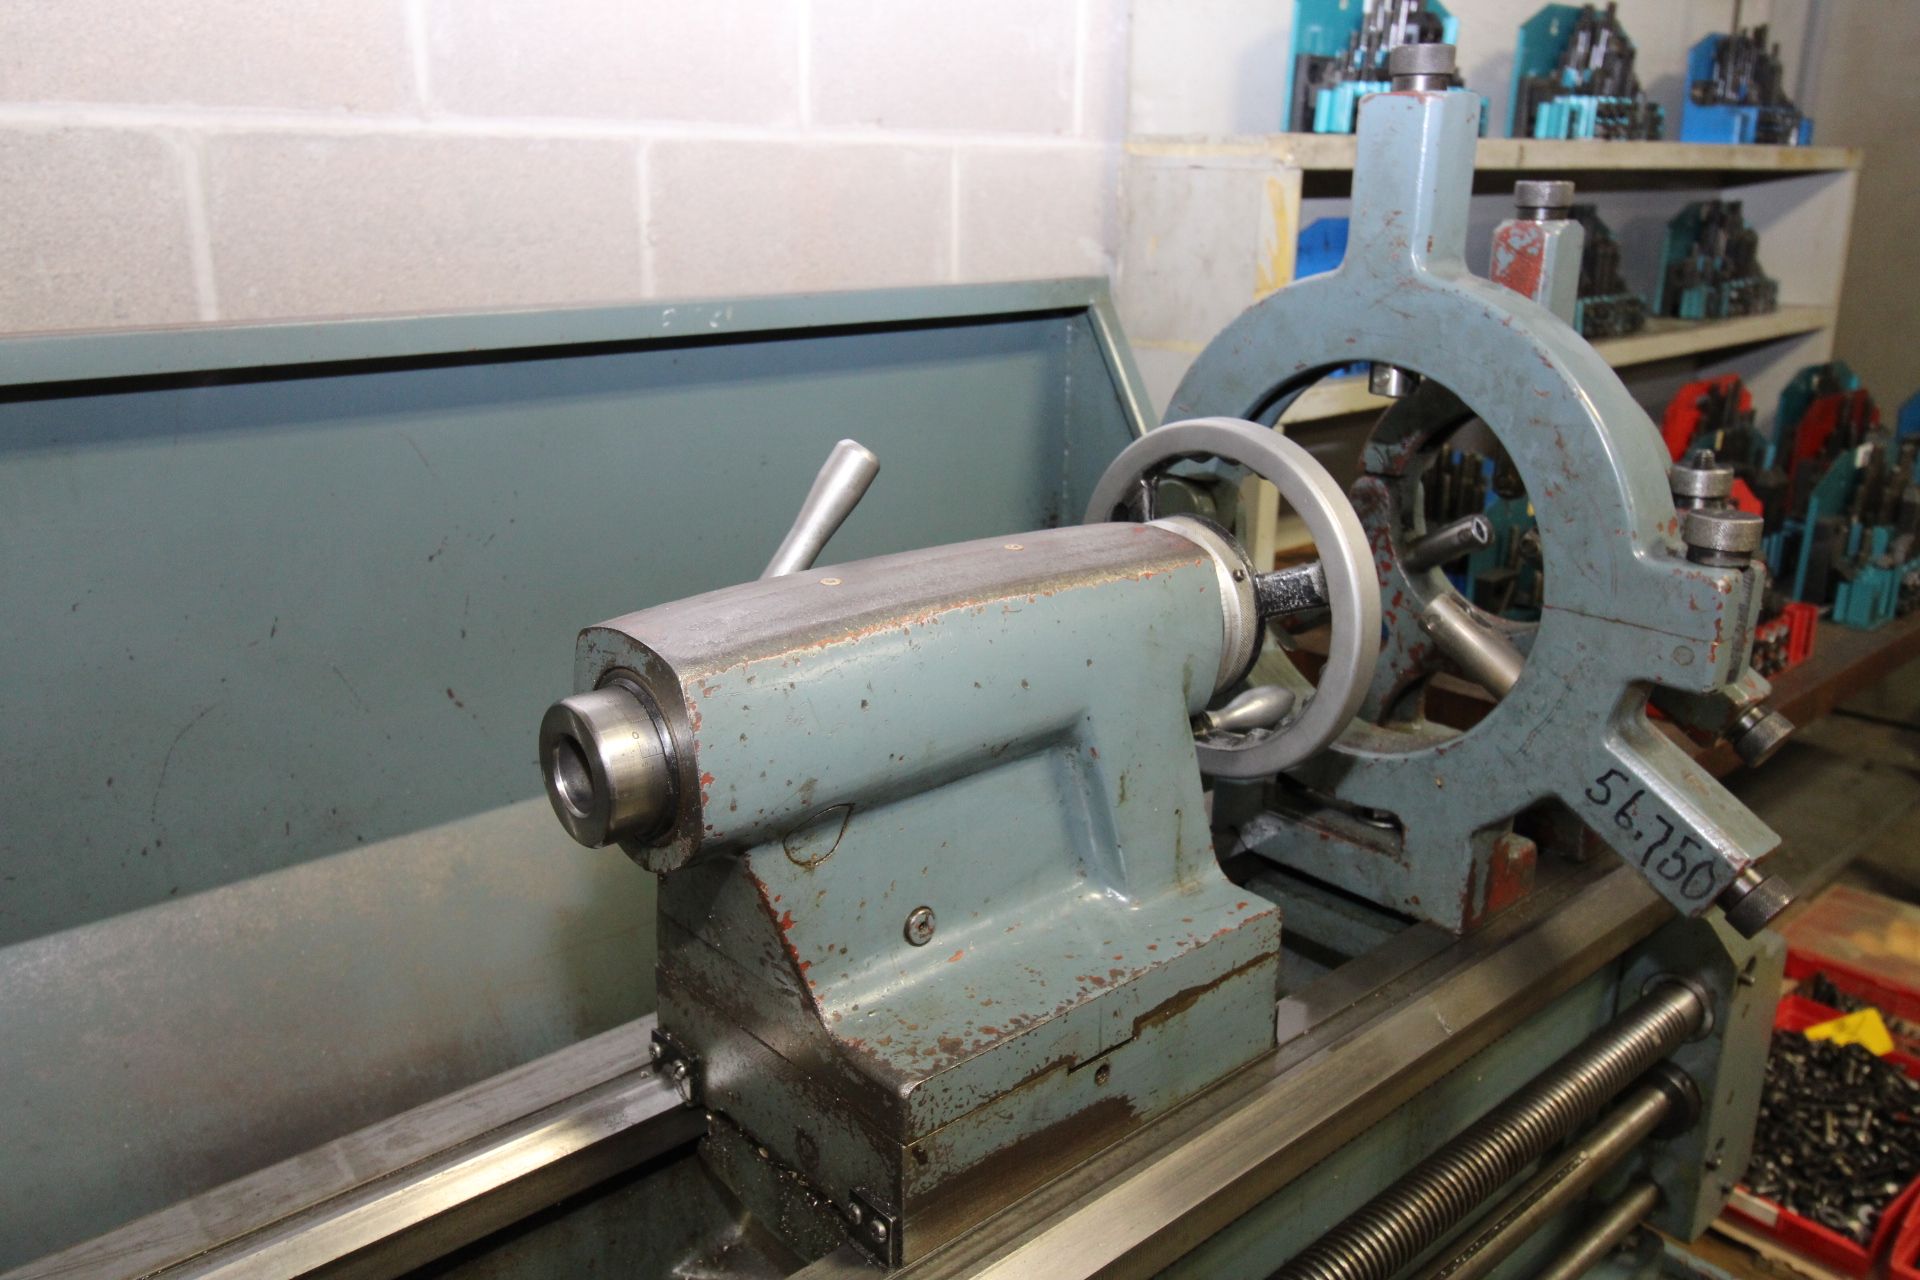 GAP BED ENGINE LATHE, KINGSTON 17” X 60”, new 2003, spds: 52-1350 RPM, 10” dia. 3-jaw chuck, 4-jaw - Image 4 of 15